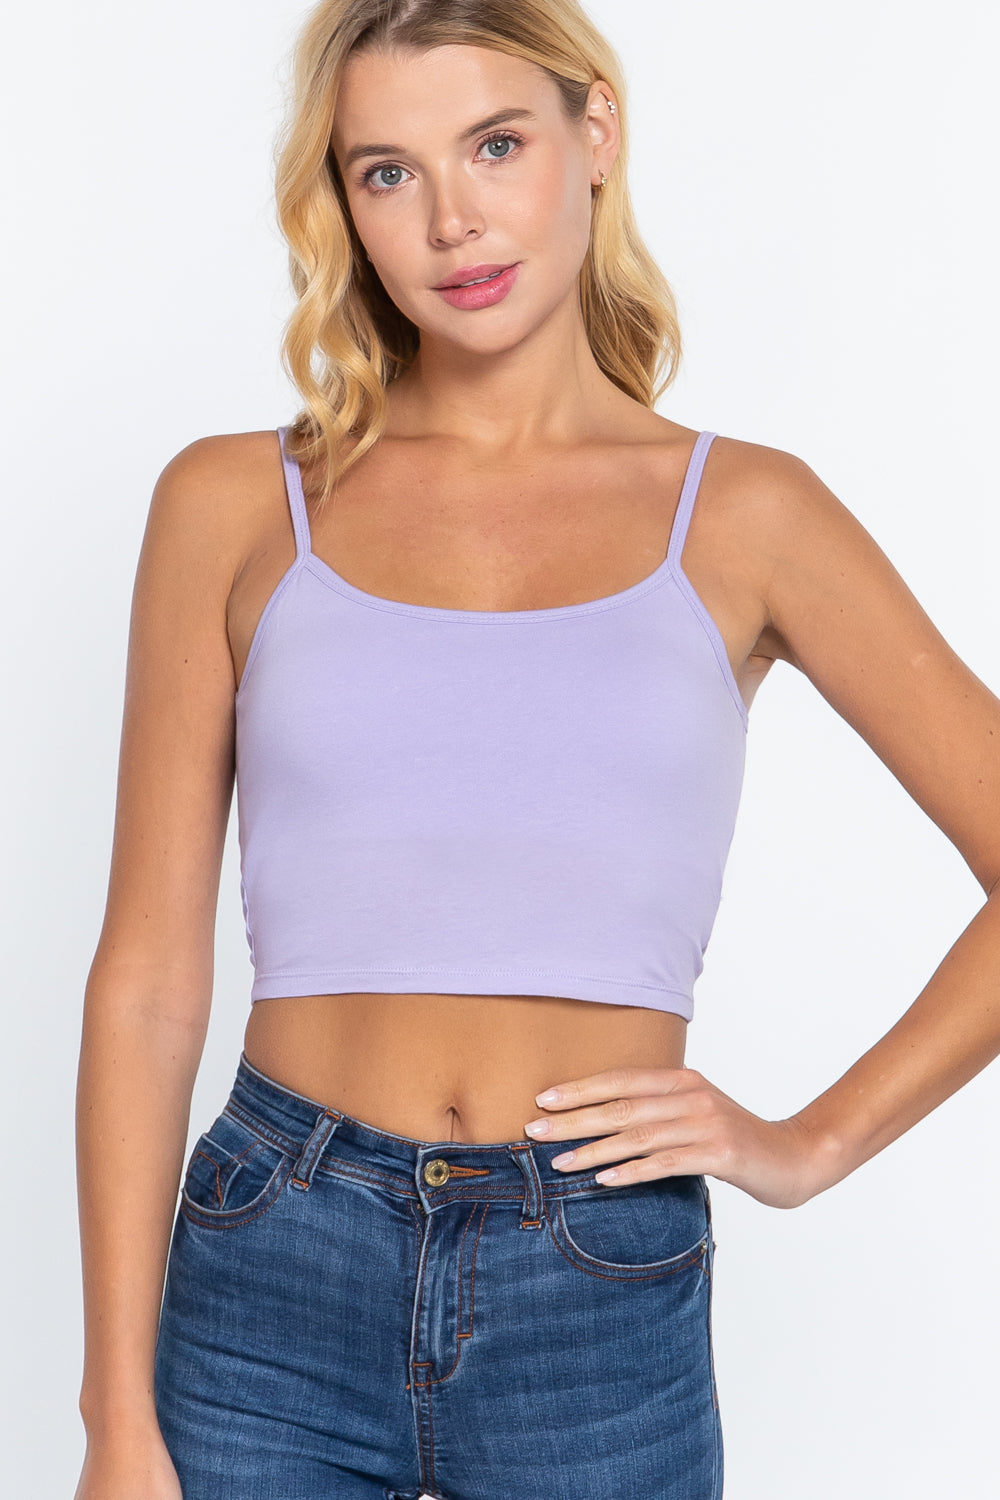 Round Neck with Removable Bra Cup Cotton Spandex Bra Top Digital in Violet